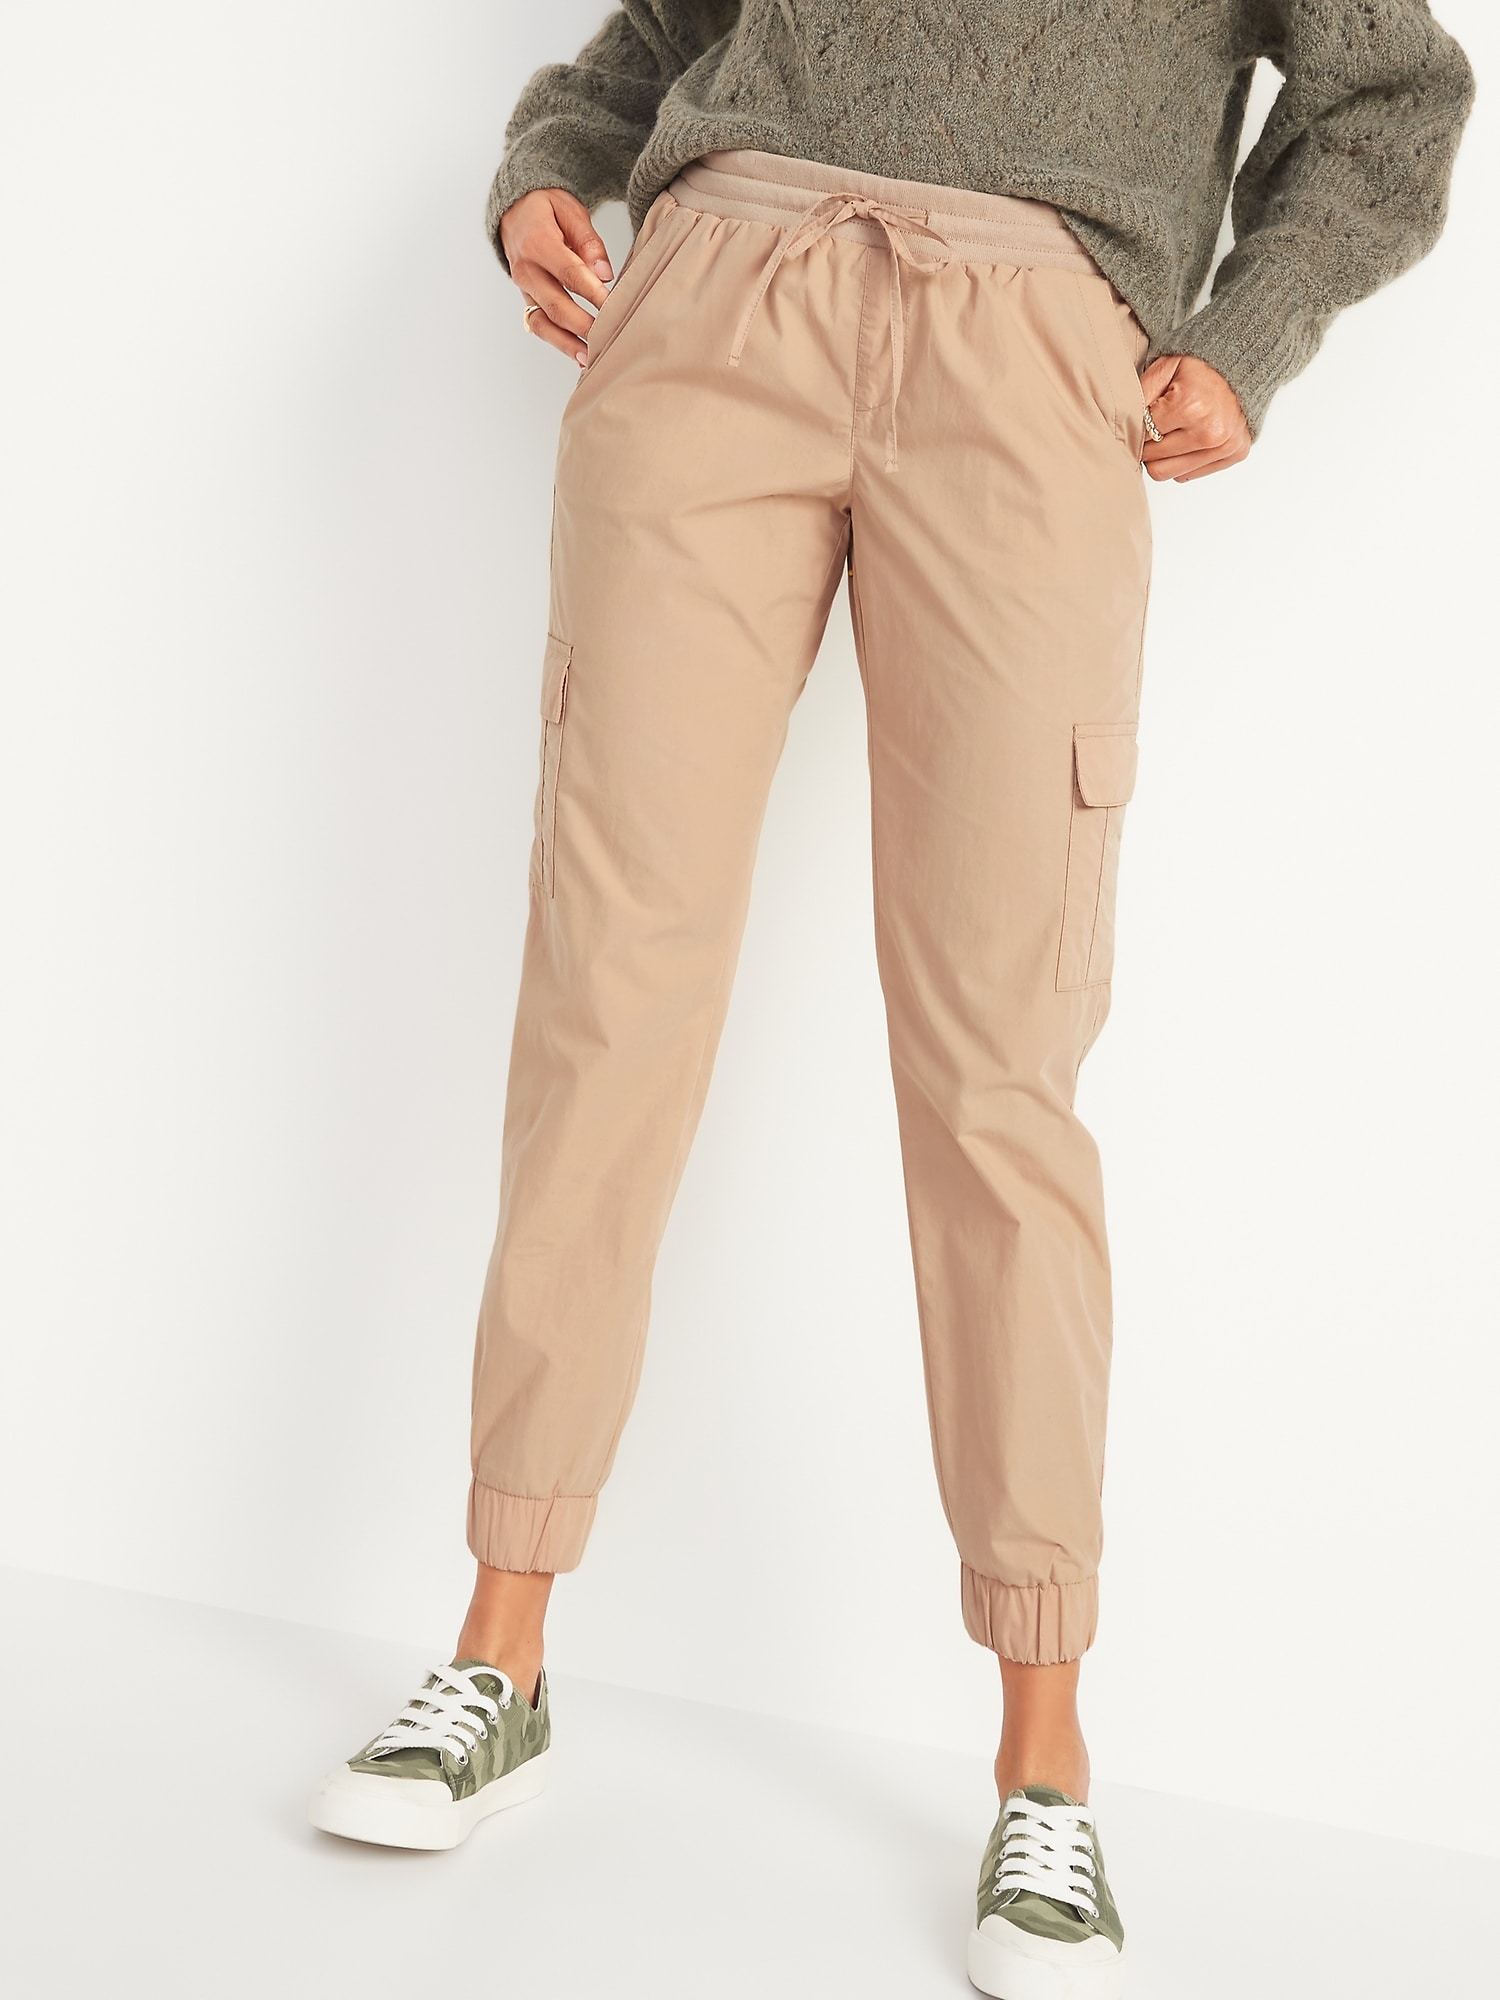 Mid-Rise Rib-Knit Waist Soft-Woven Cargo Jogger Pants for Women